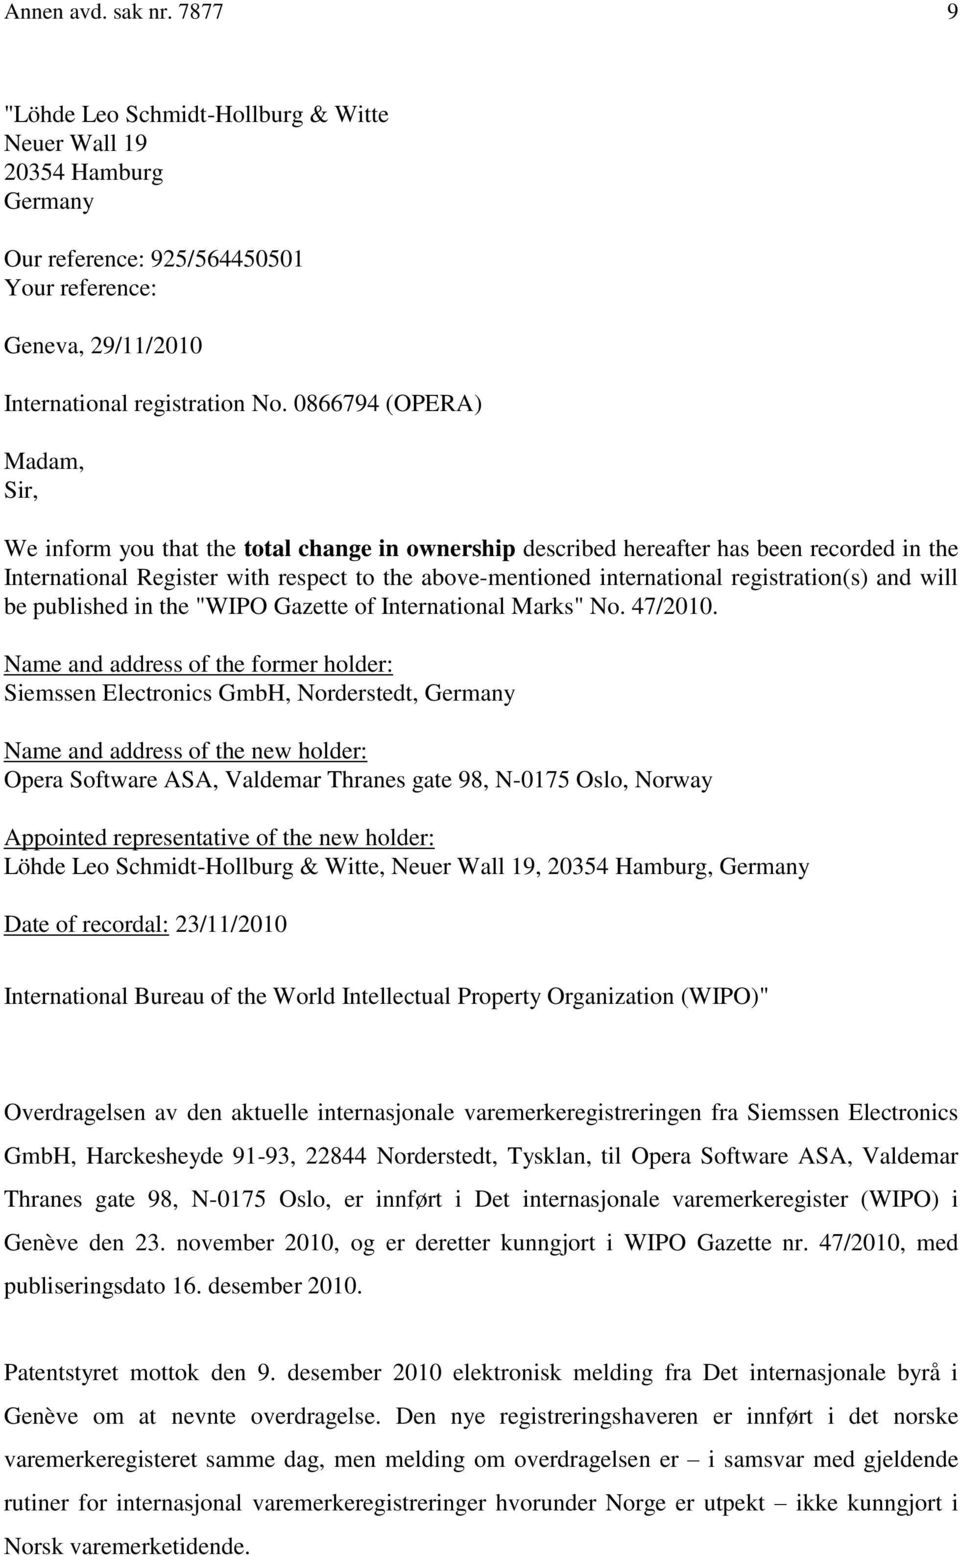 registration(s) and will be published in the "WIPO Gazette of International Marks" No. 47/2010.